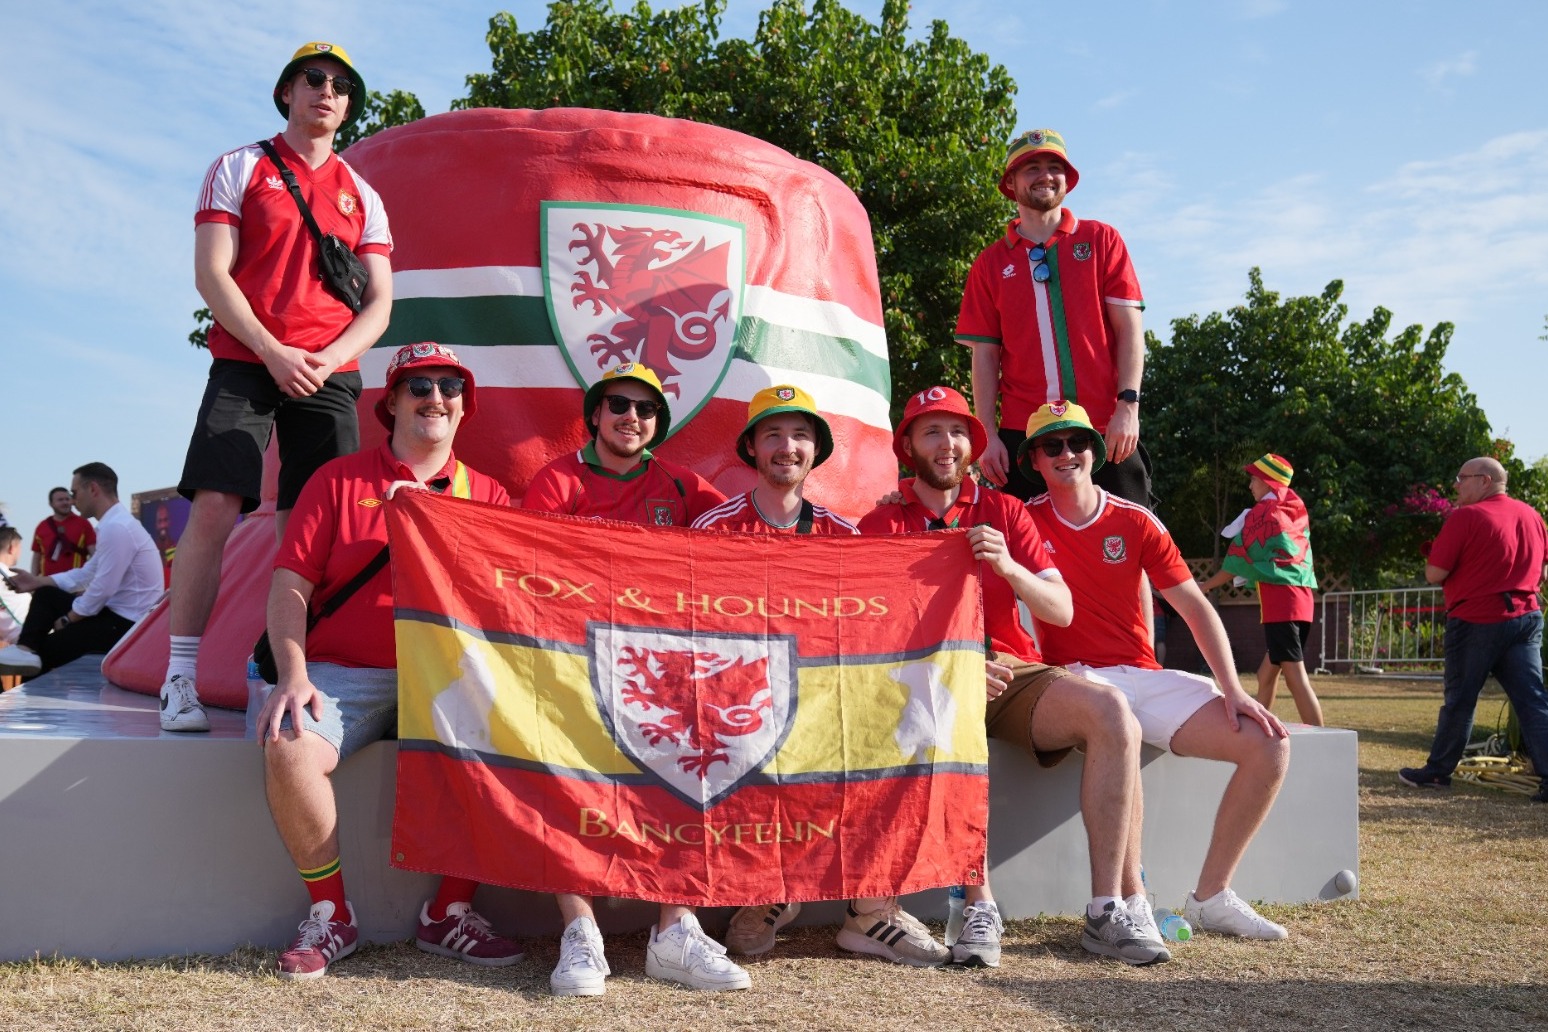 Rainbow hats and flags get go-ahead as Wales and England seek World Cup progress 